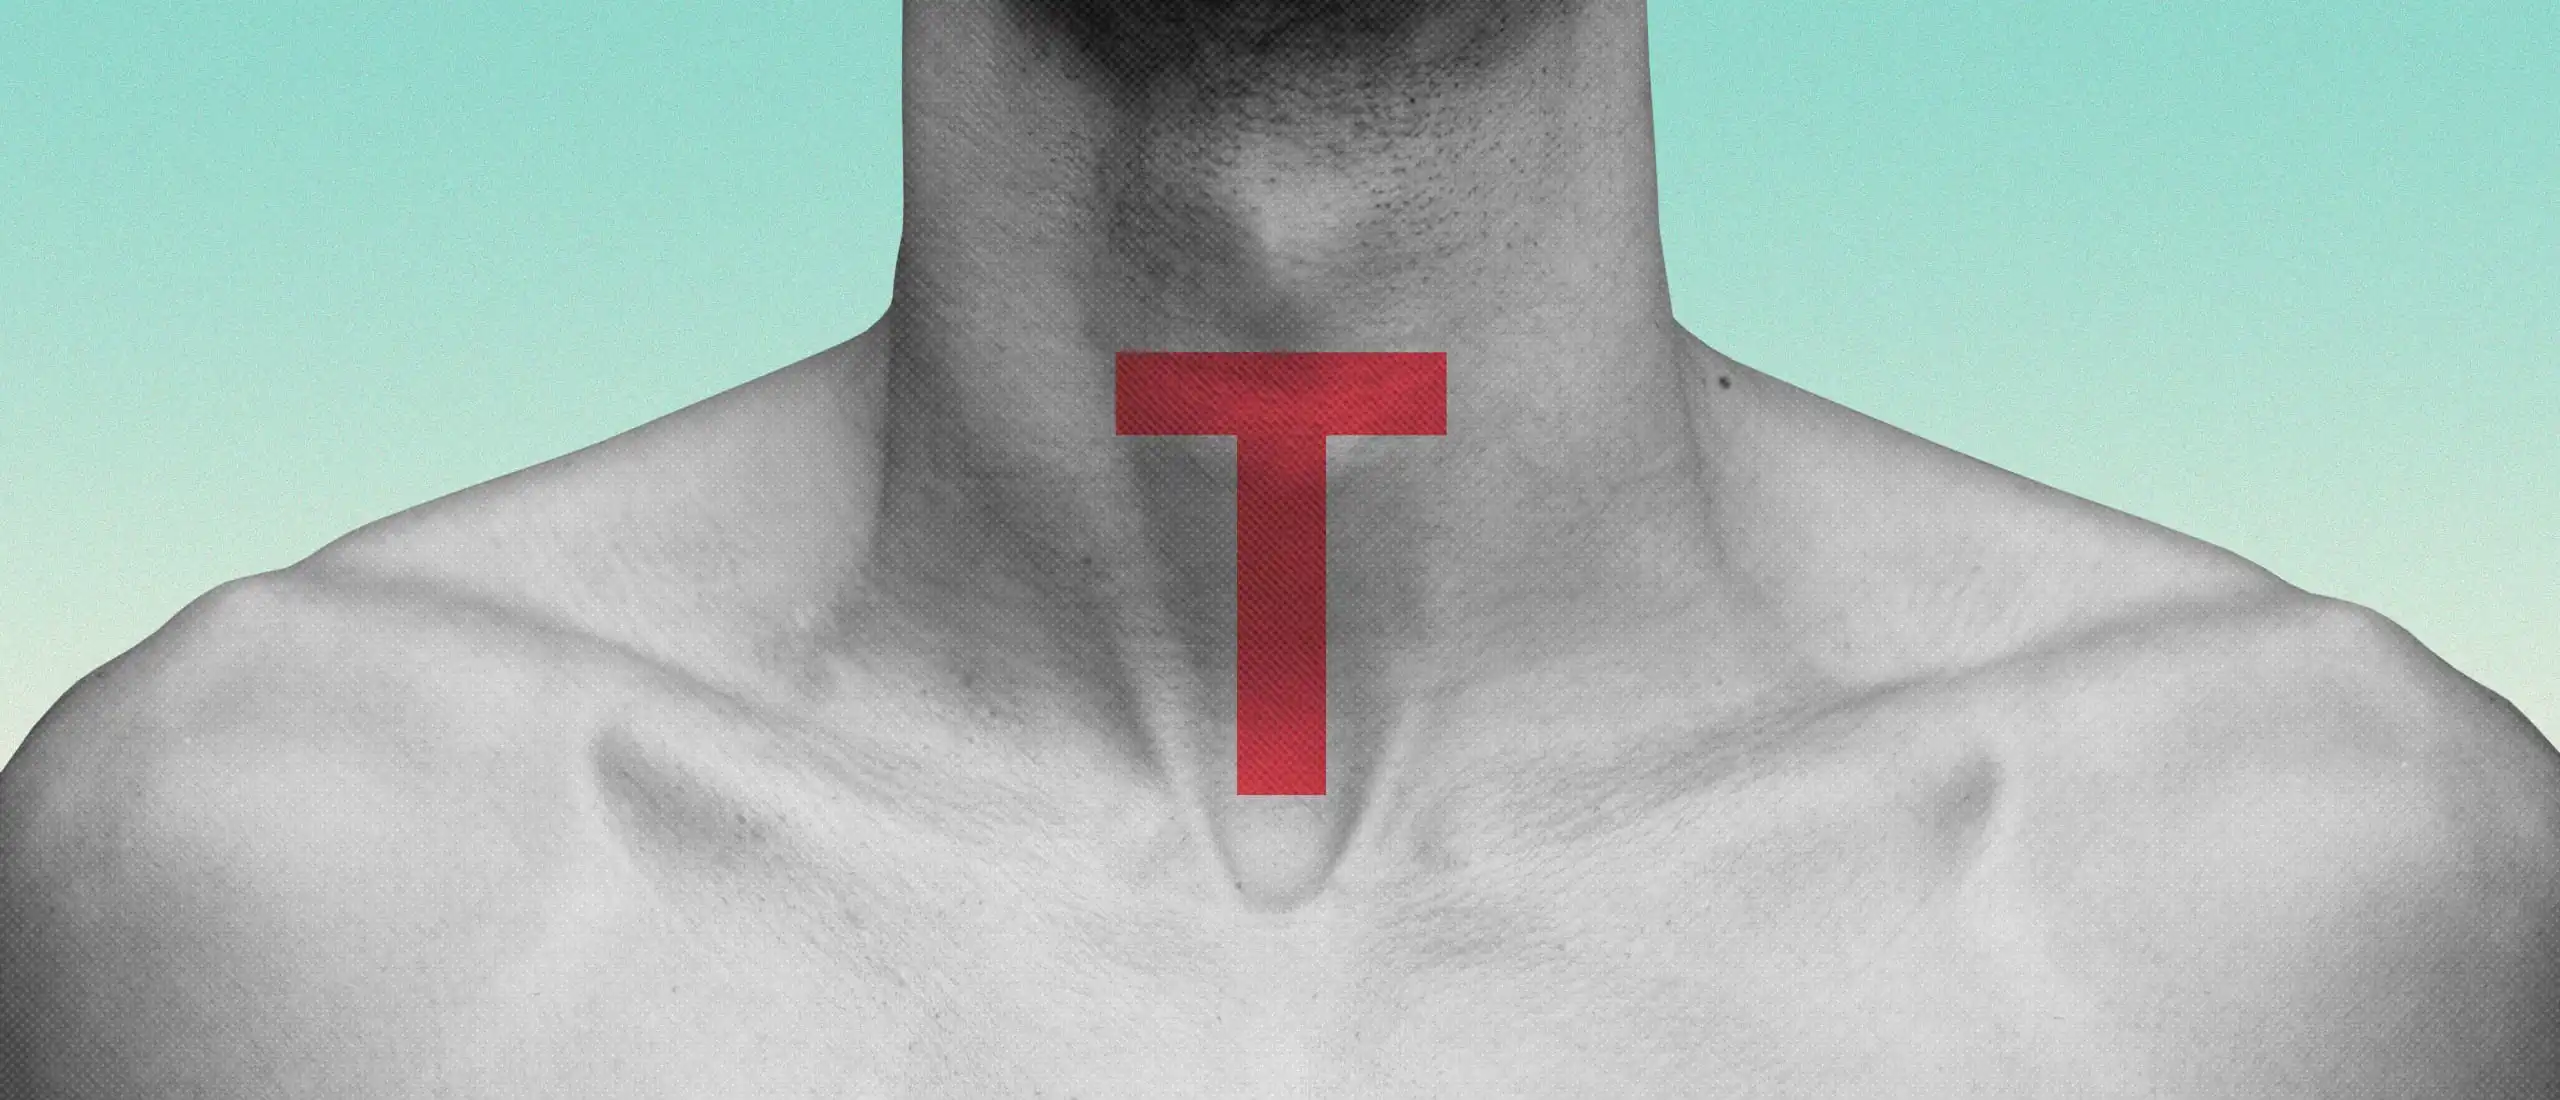 man with a red T on his neck